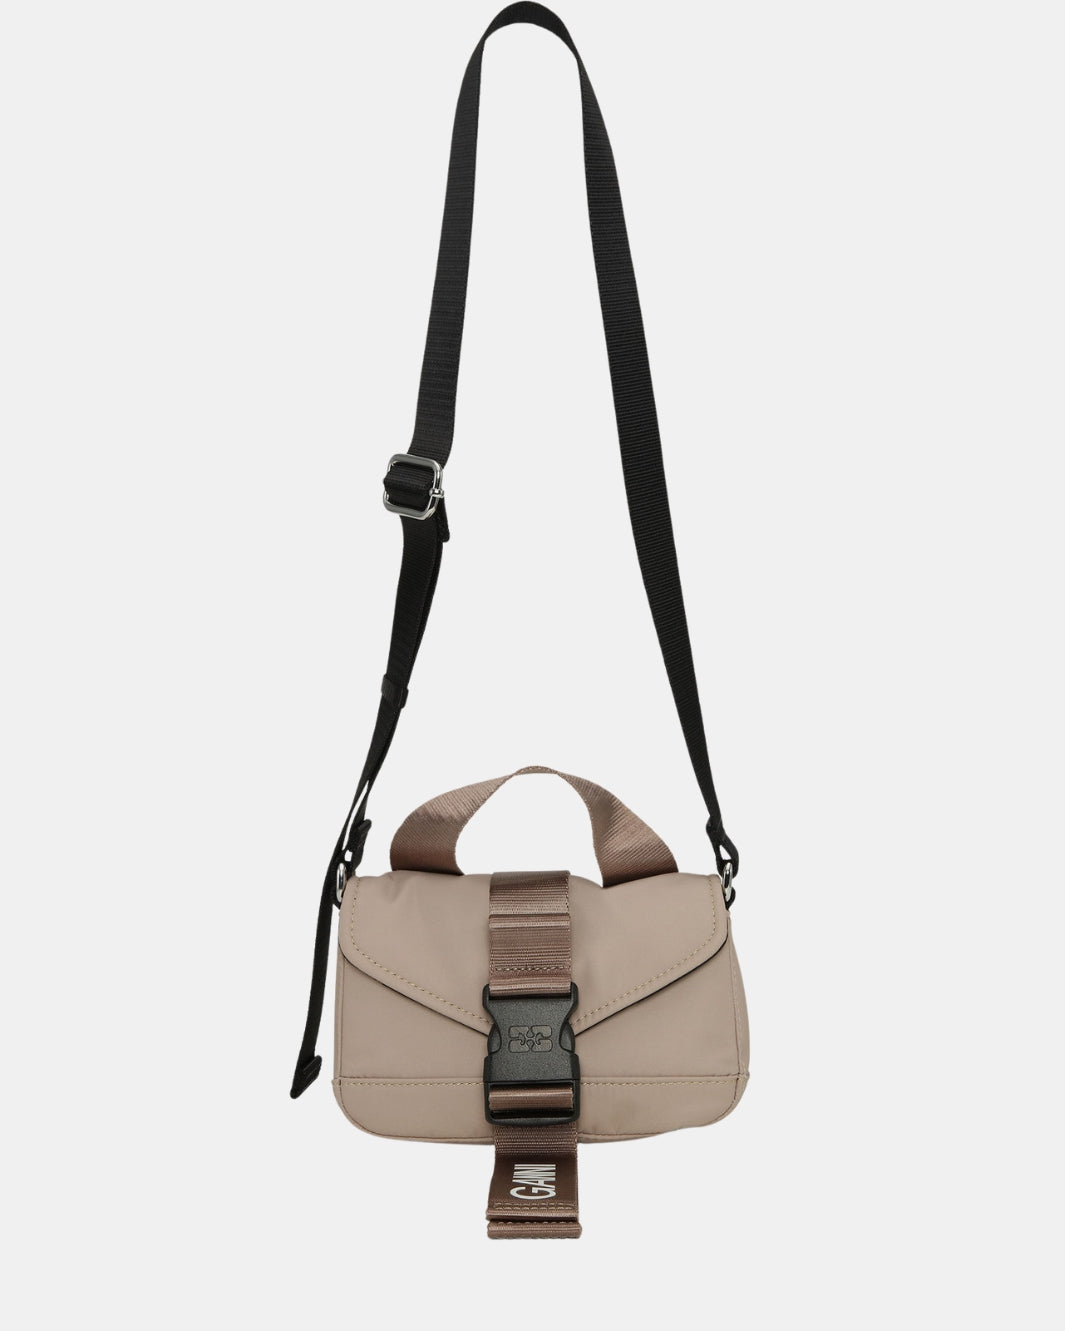 RECYCLED TECH MINI SATCHEL BAG IN OYSTER GRAY - Romi Boutique